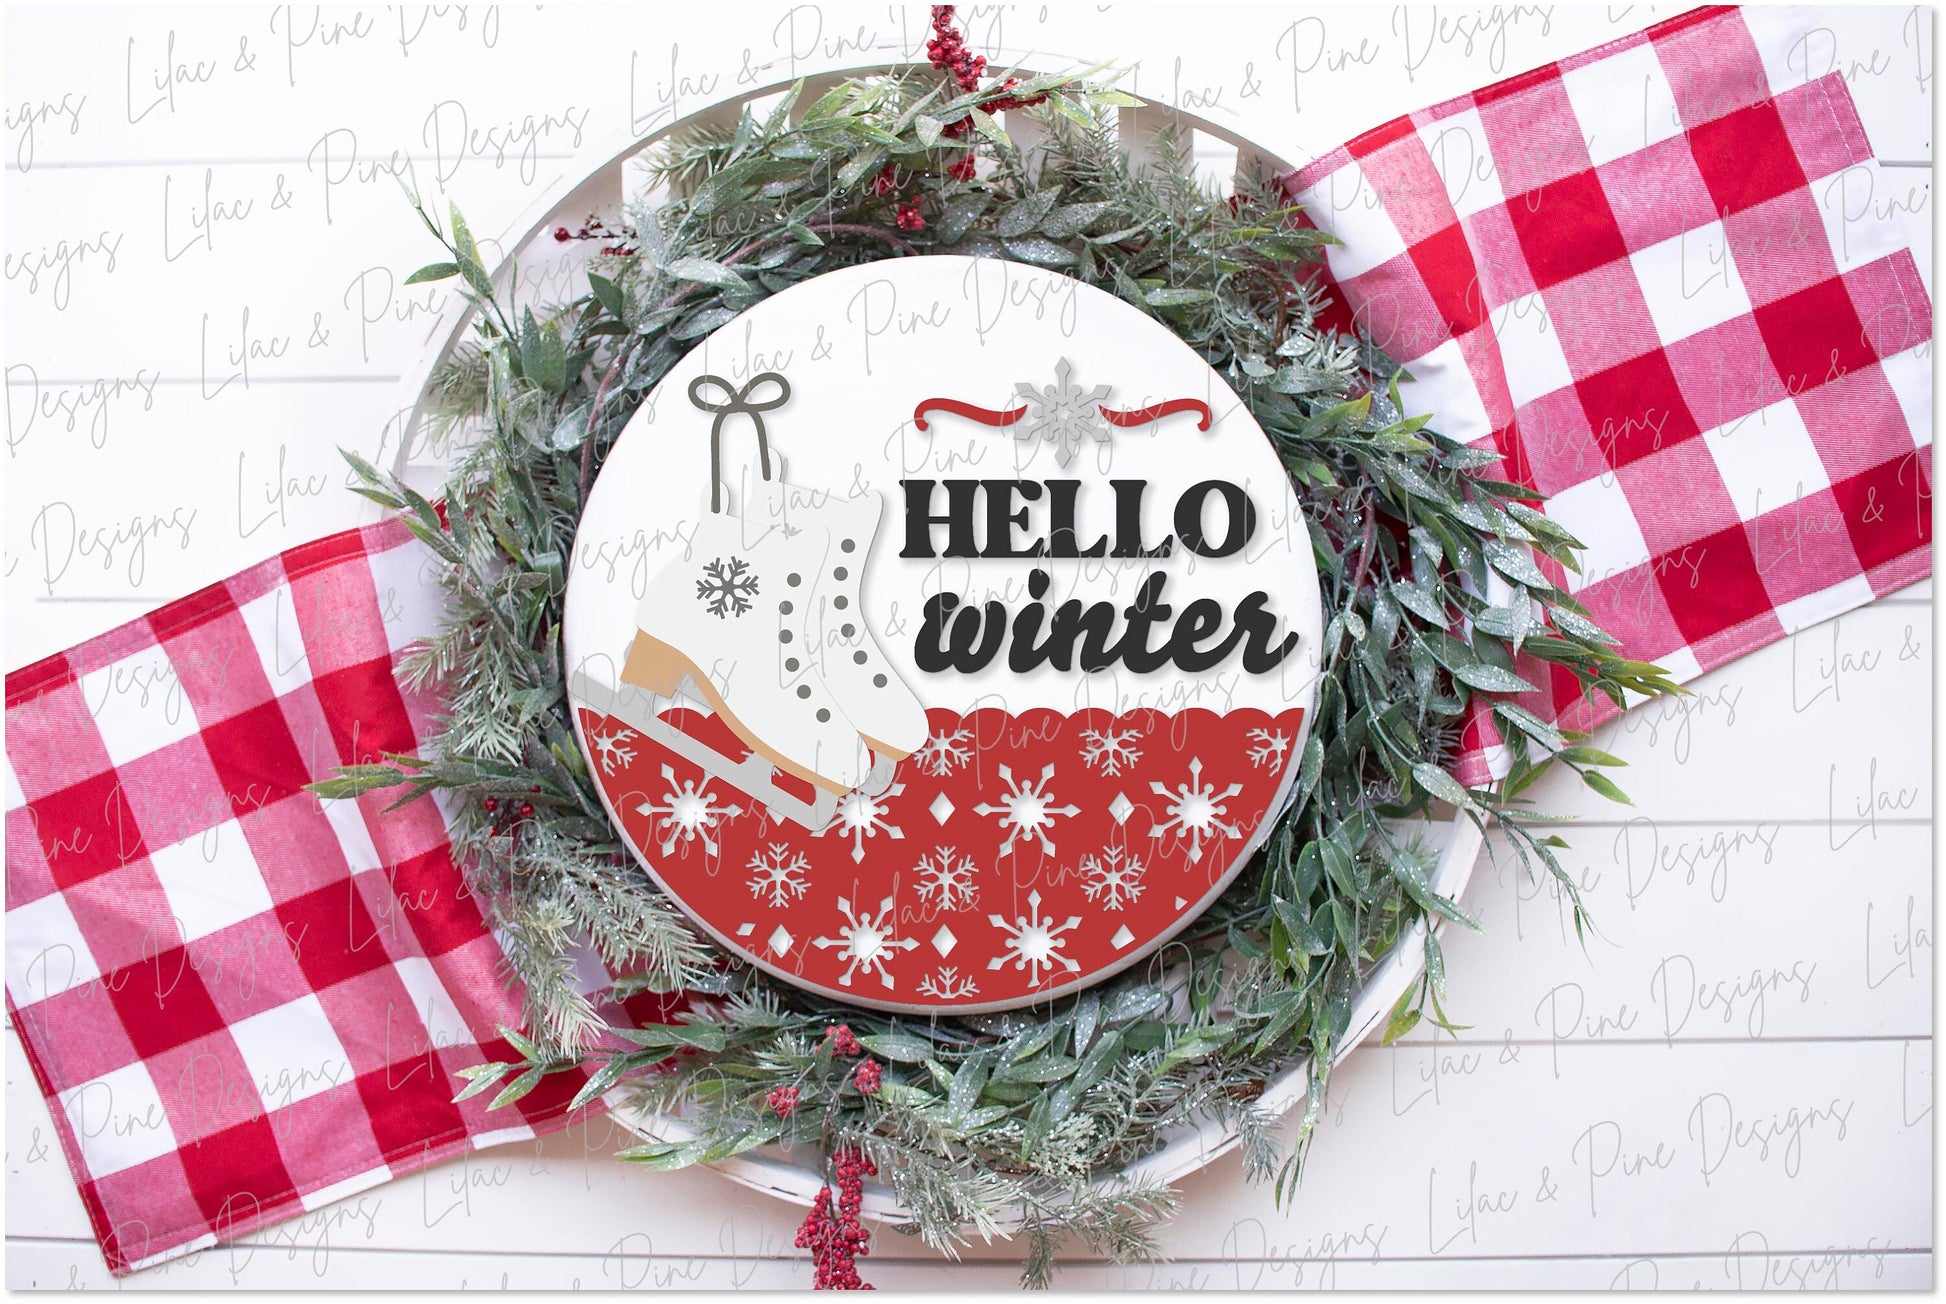 Hello winter sign SVG, Christmas welcome sign, Winter door hanger SVG, ice skates porch sign, snowflake decor, Glowforge Svg, laser cut file